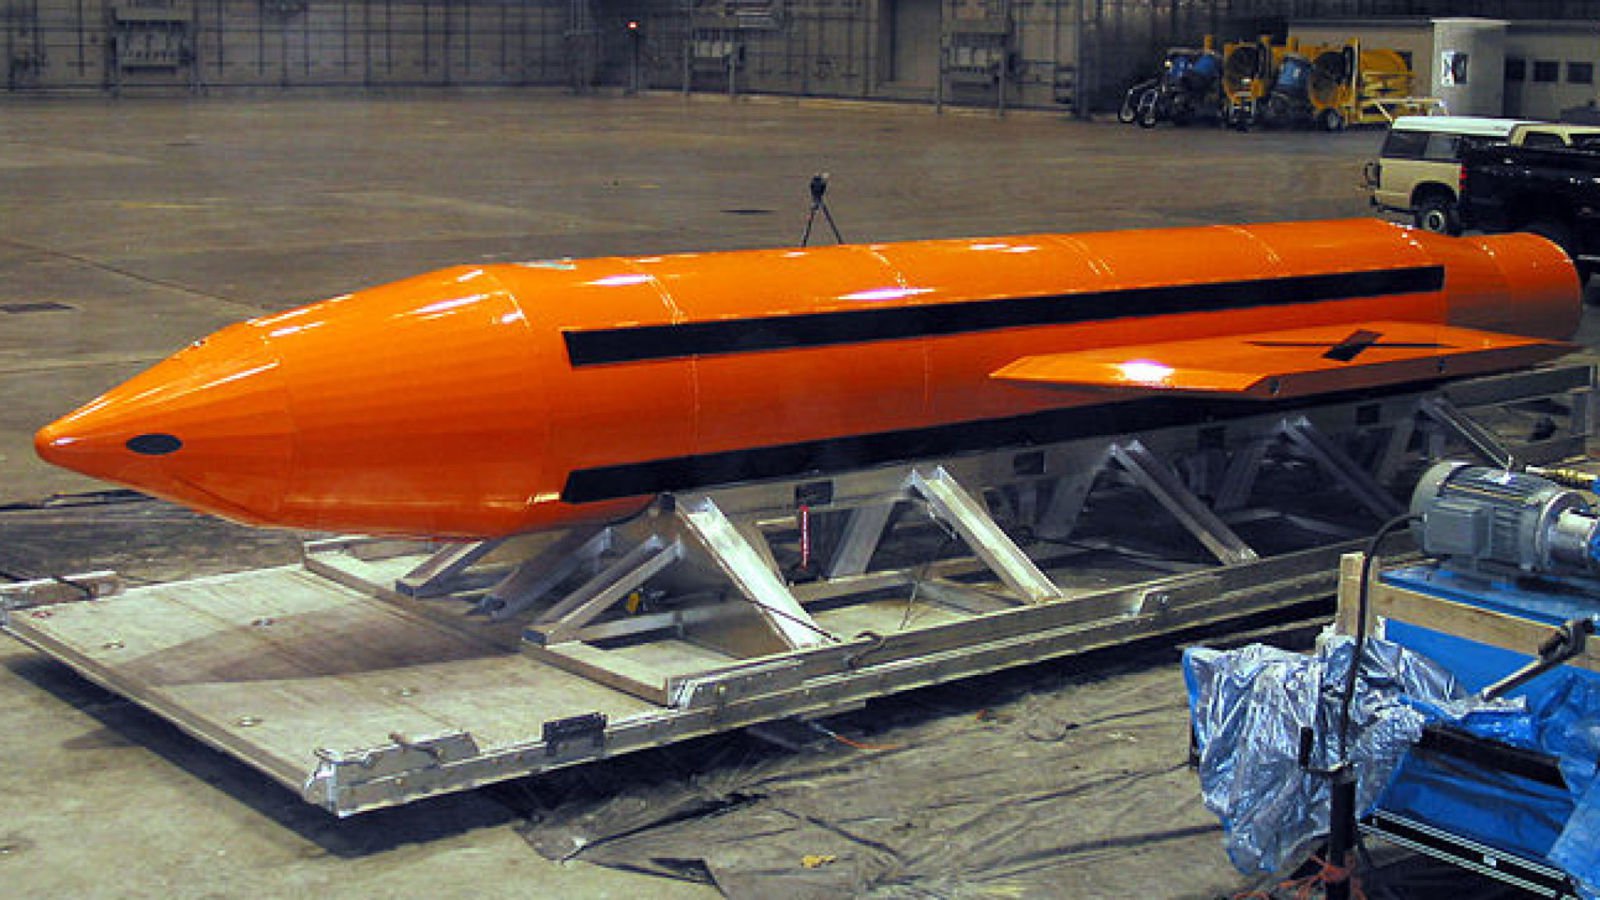 America Just Dropped The Mother Of All Bombs On ISIS Target f8ca657227201c1f8e4ff4b9f21d3700bbeef6e92cd146be34c8b70fcfcd1a44 3930239